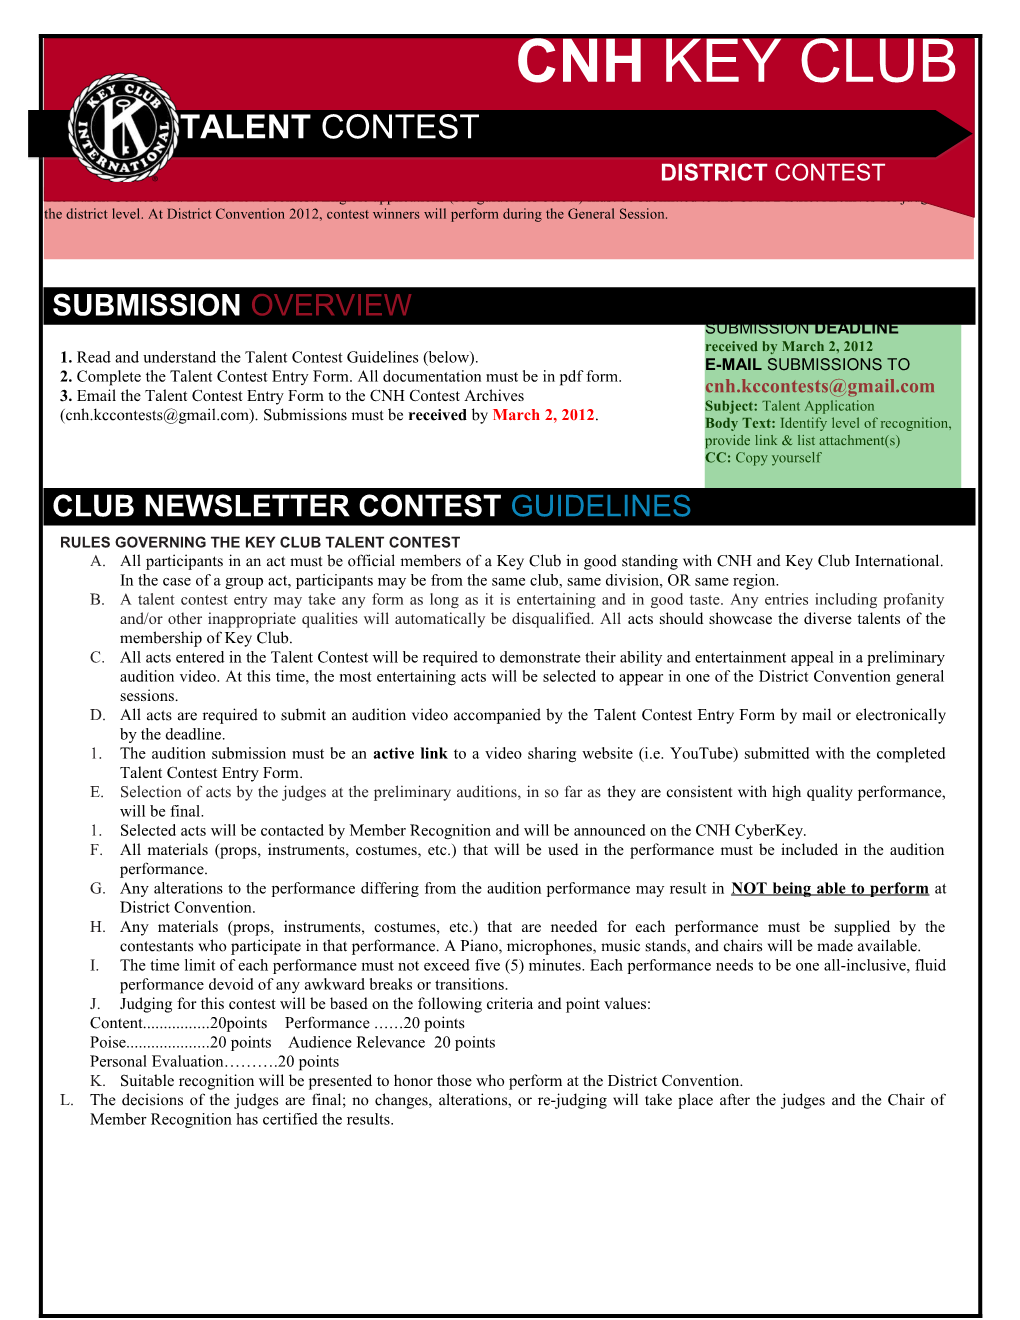 1. Read and Understand the Talent Contest Guidelines (Below)